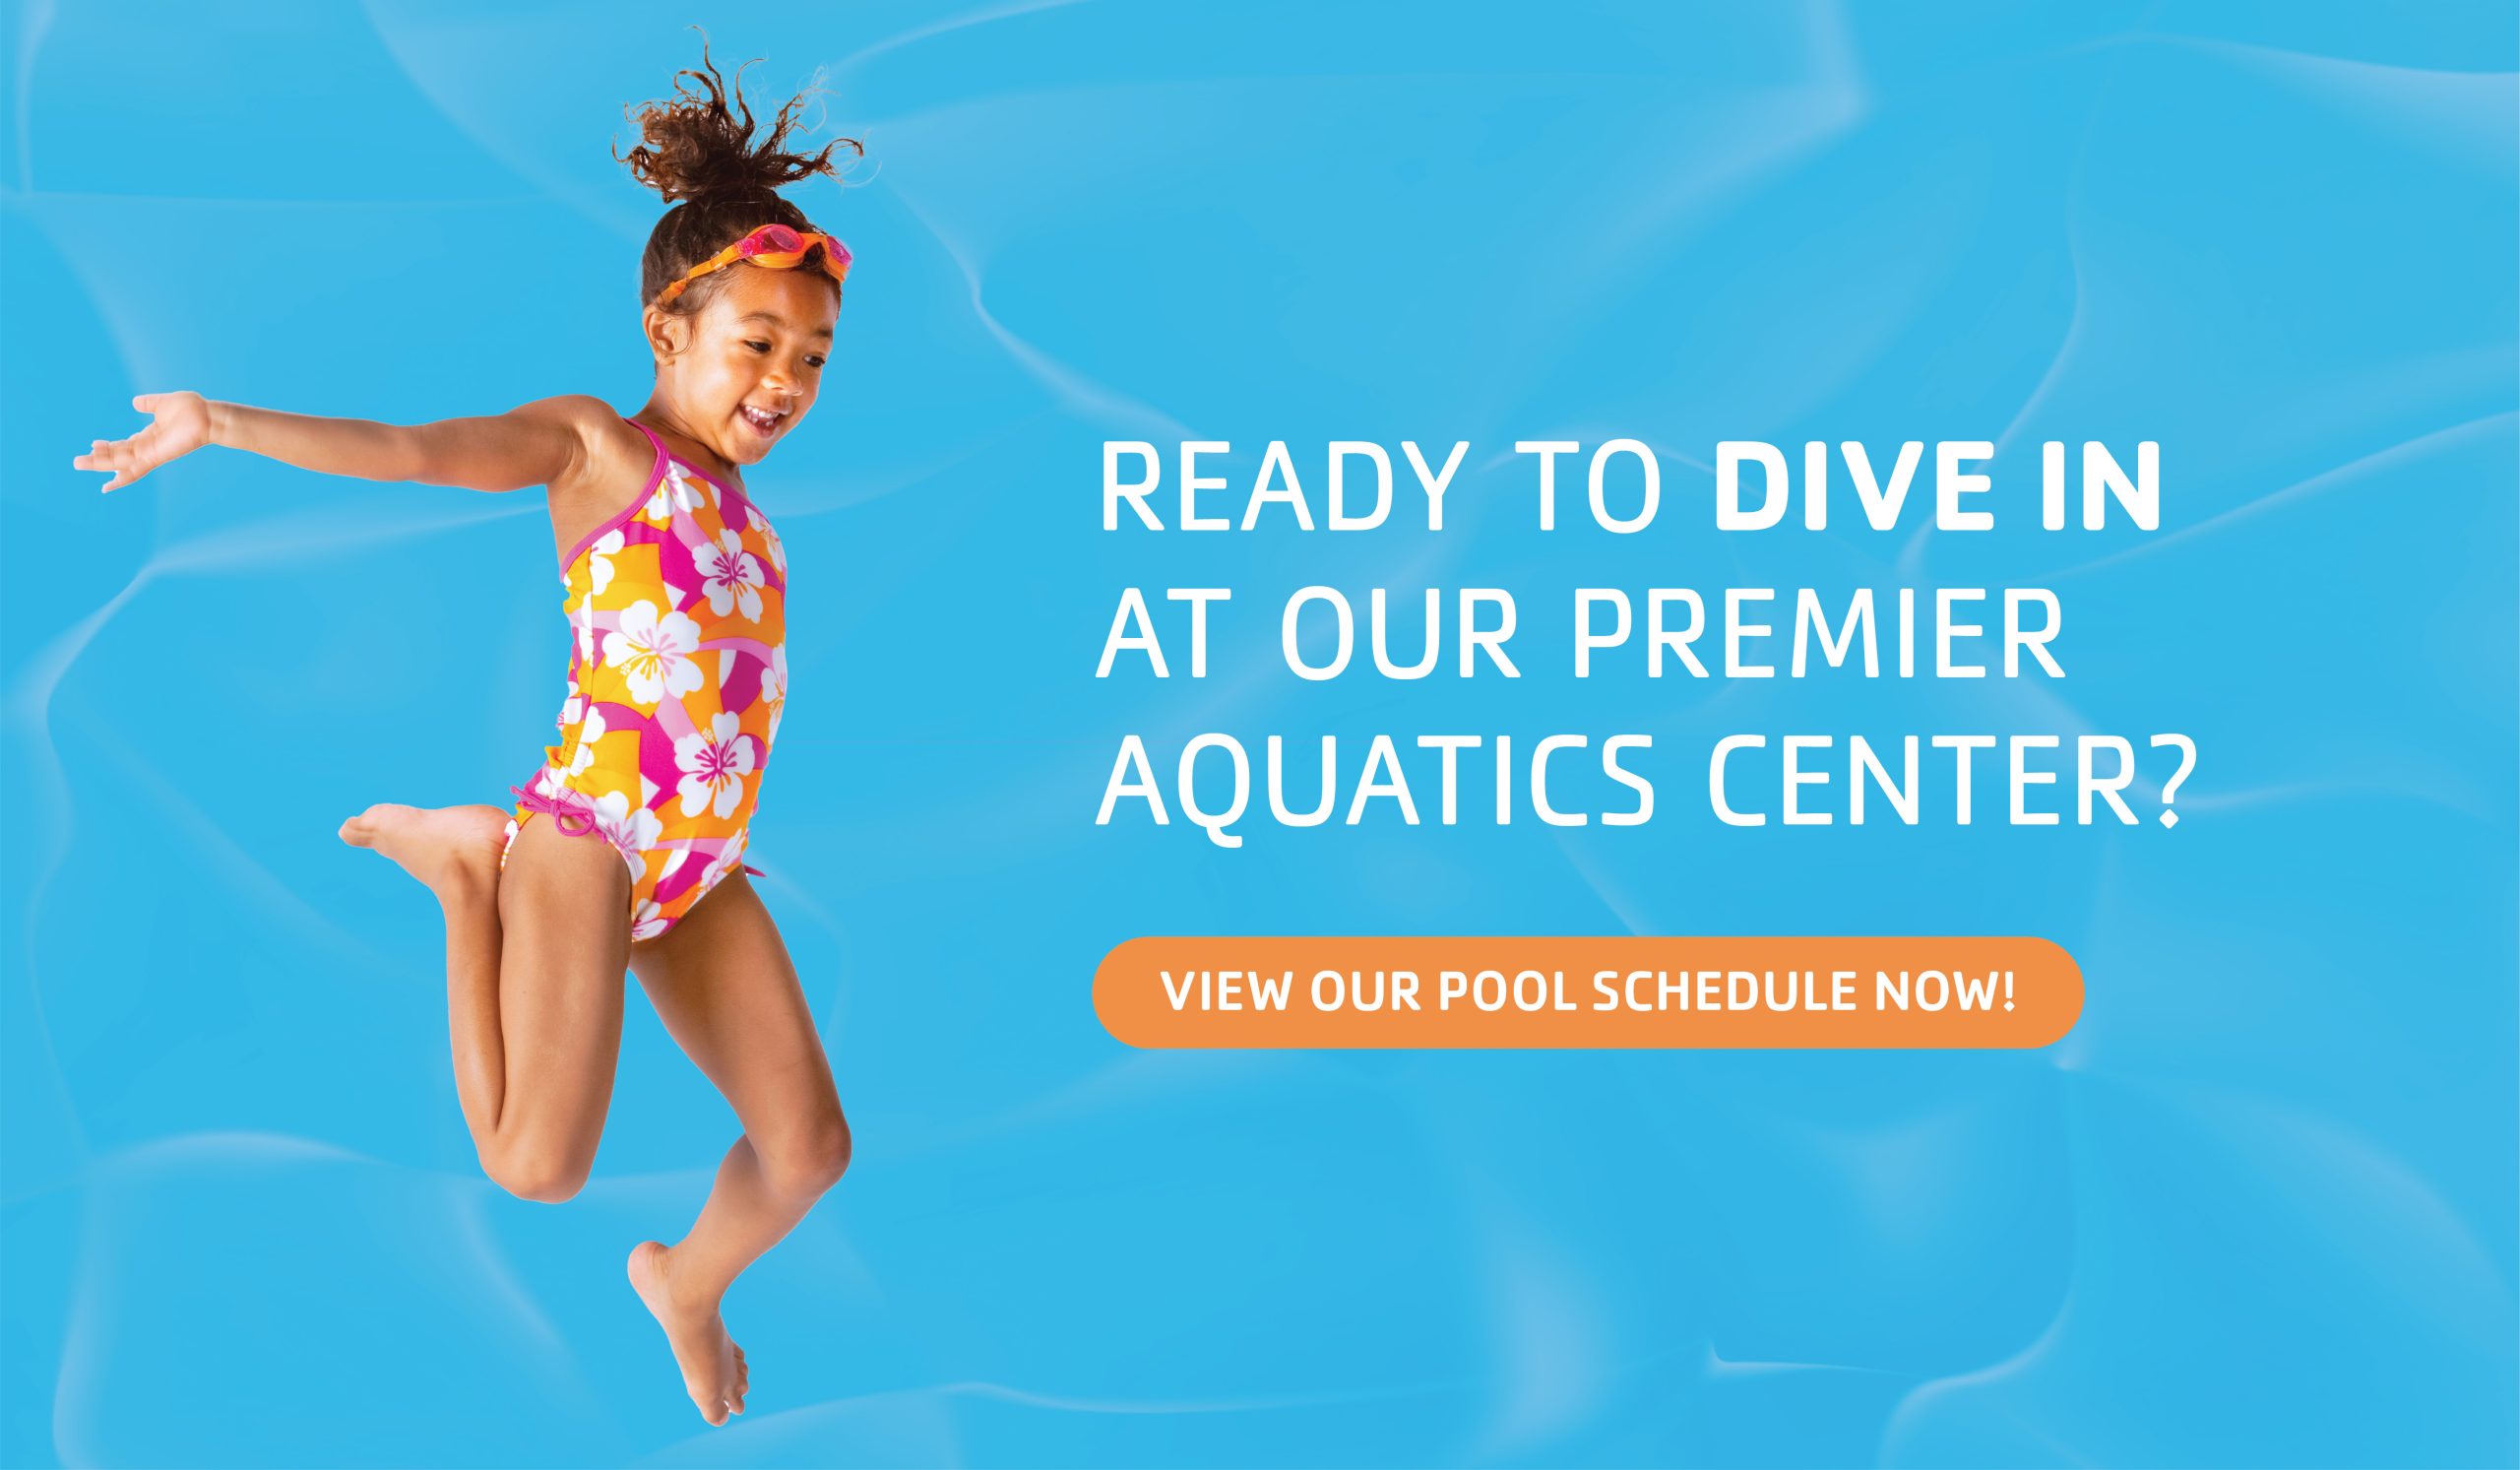 Ready to dive in at our premier aquatics center? View our pool schedule now!